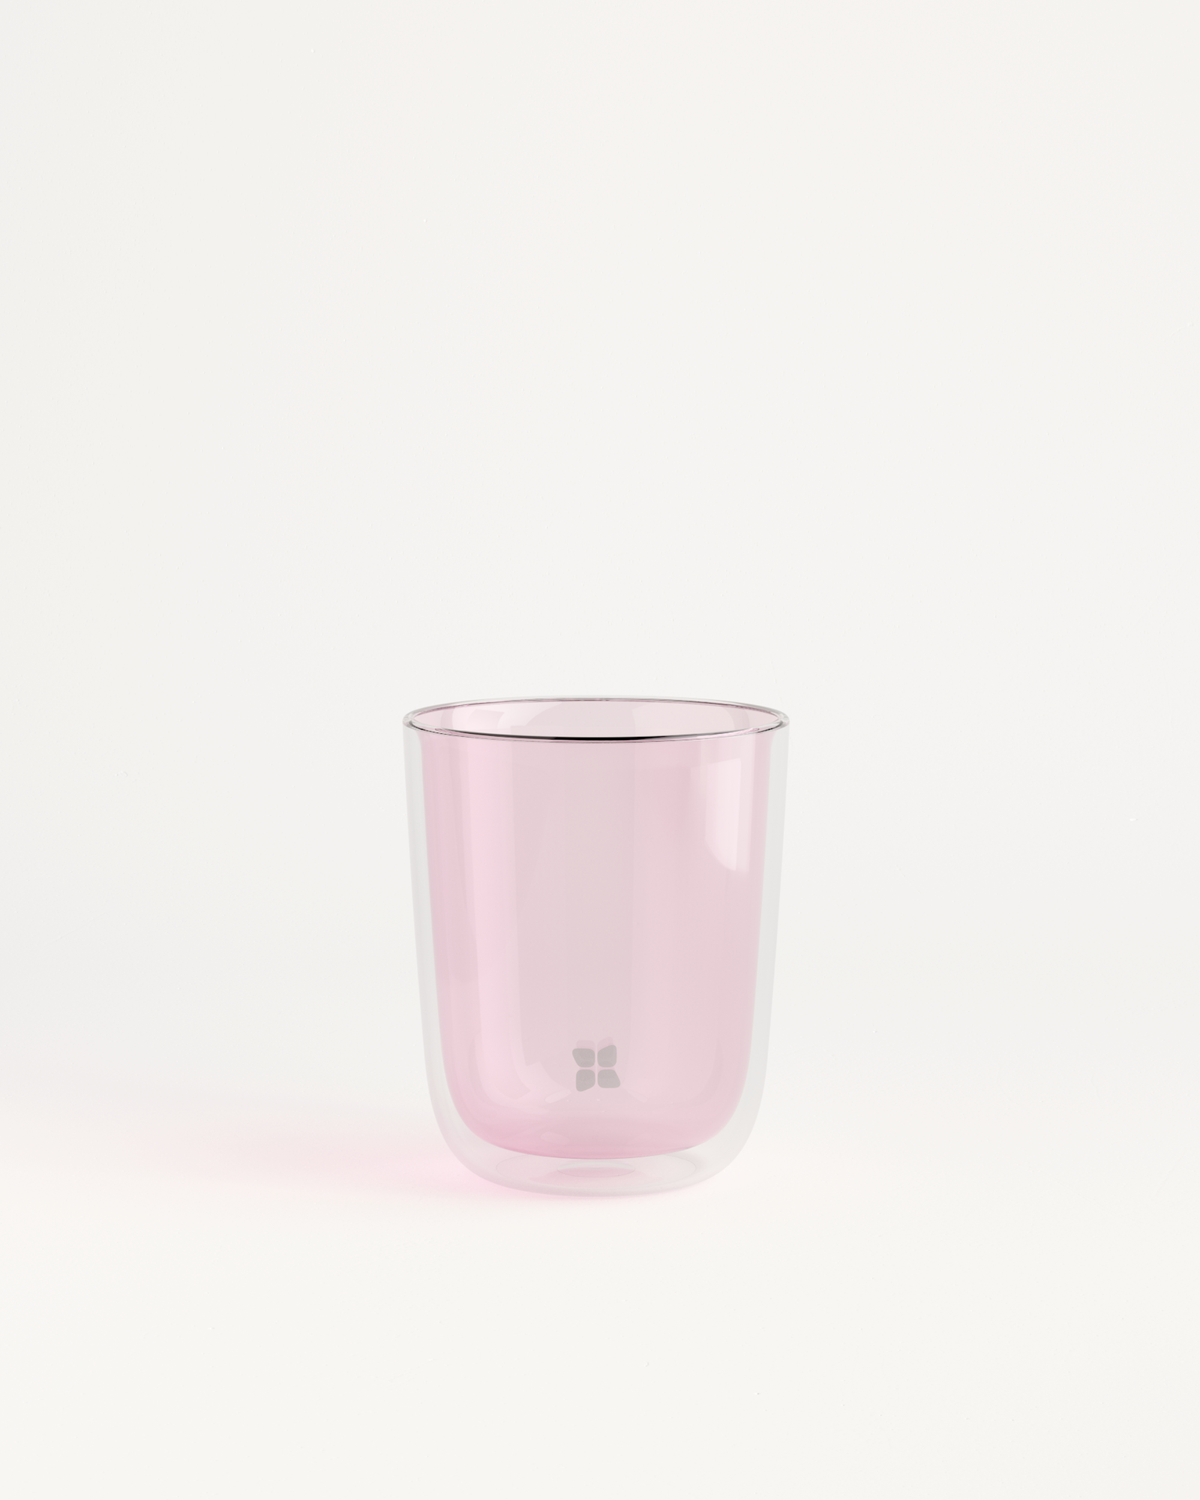 Glass Cup Set Double-Walled Glass incl. Sip Lid